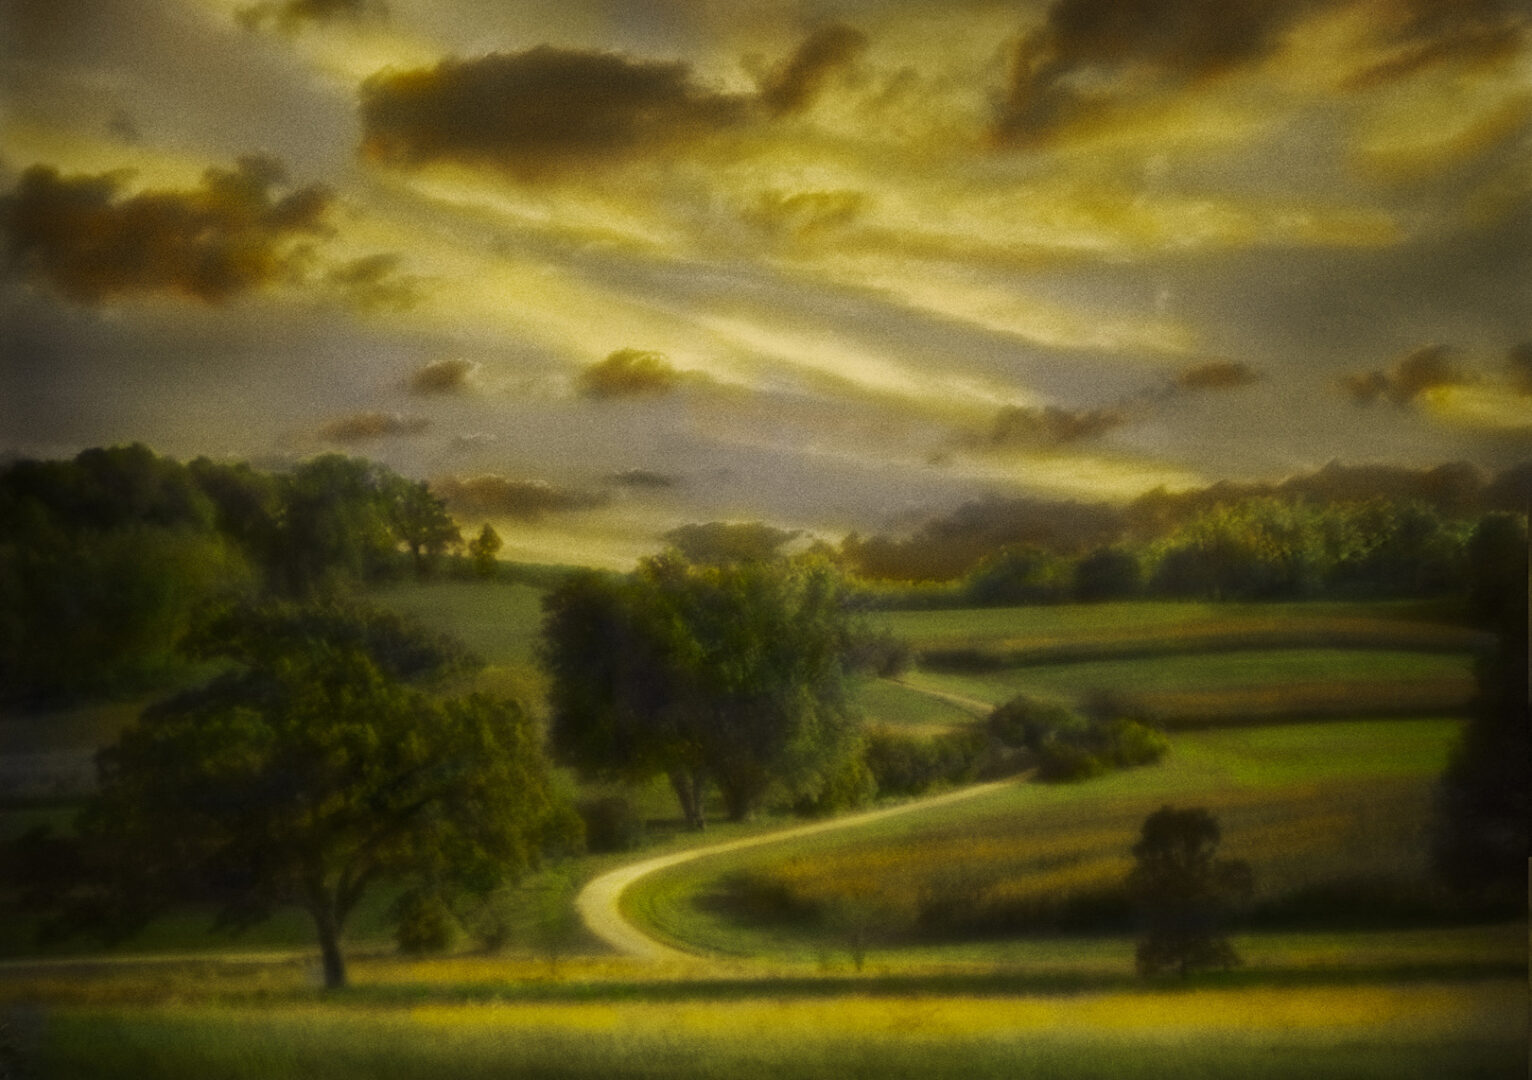 A painting of a green field with trees and clouds